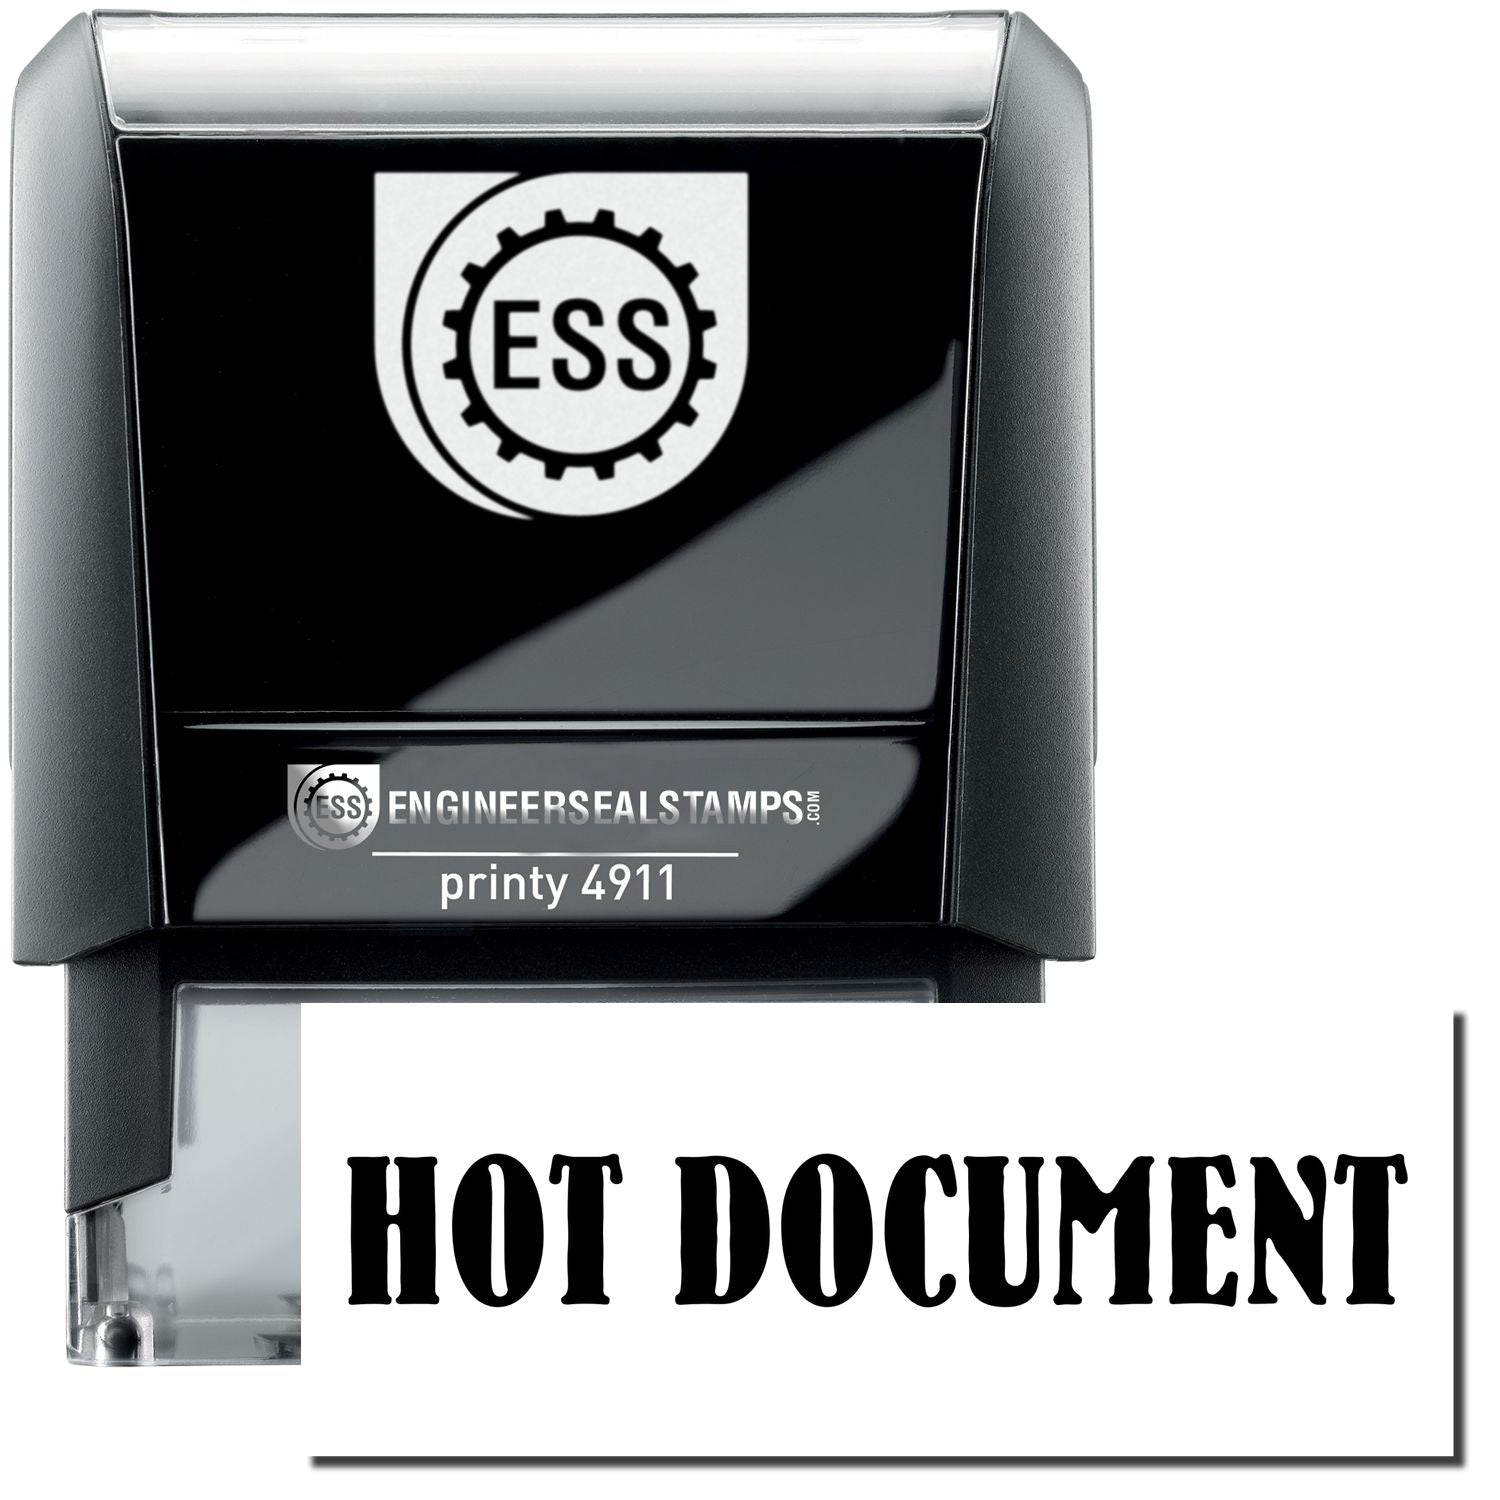 A self-inking stamp with a stamped image showing how the text "HOT DOCUMENT" is displayed after stamping.